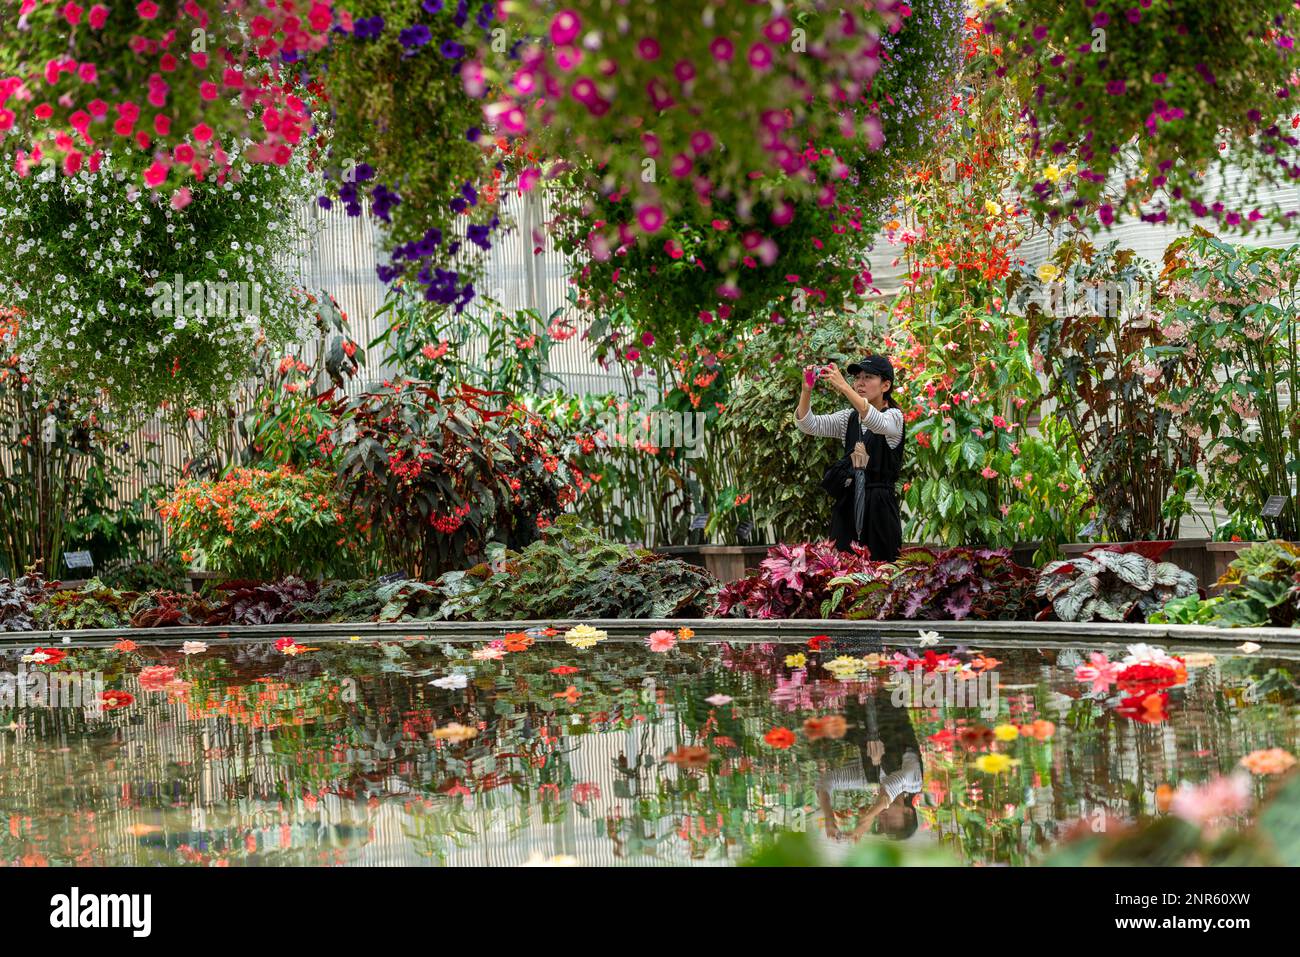 A women takes a picture of the flowers at the Begonia Gardens at Naban No Sato Flower Park, Kuwana, Mie, Japan. Stock Photo